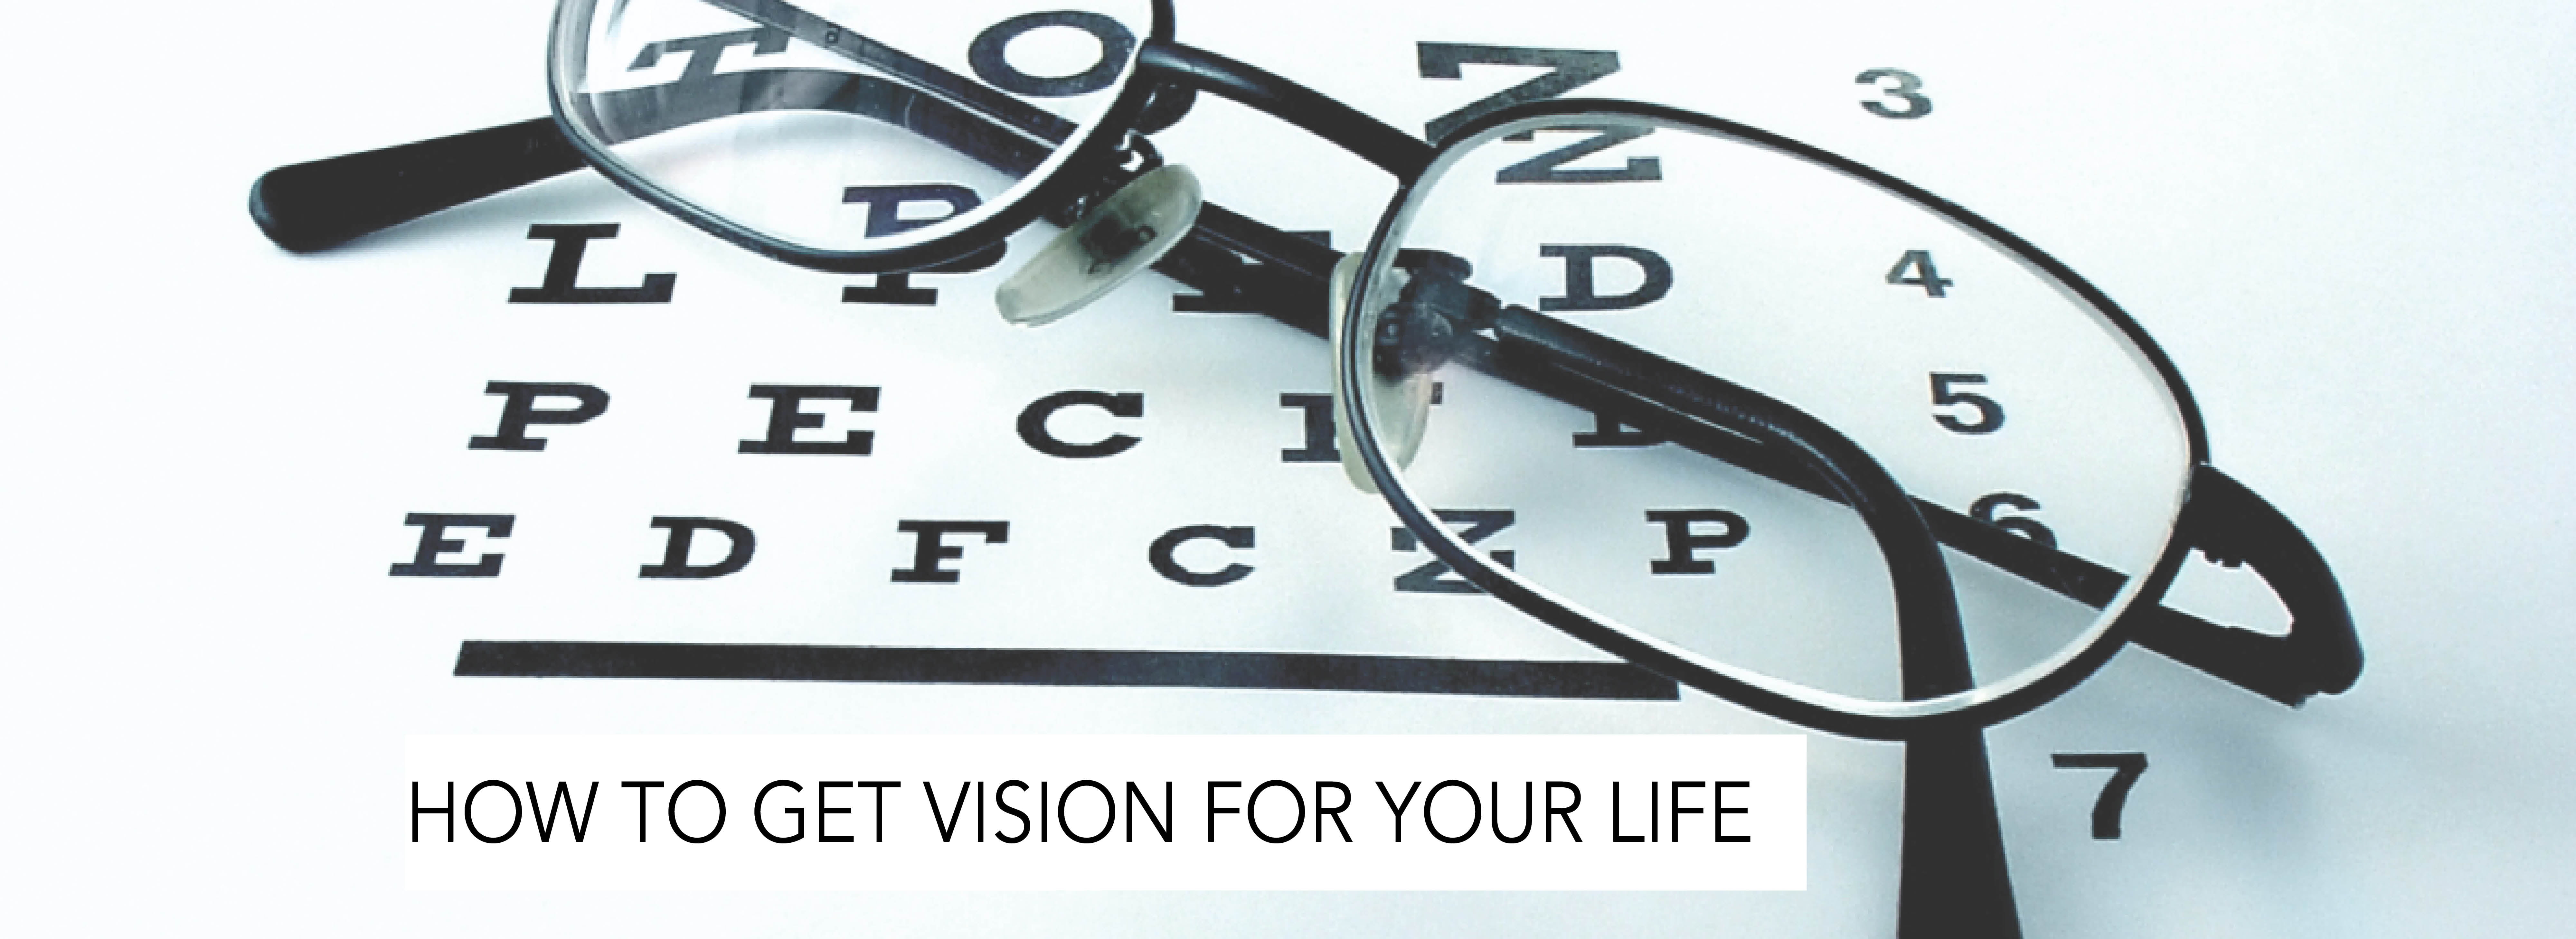 Vision For Your Life